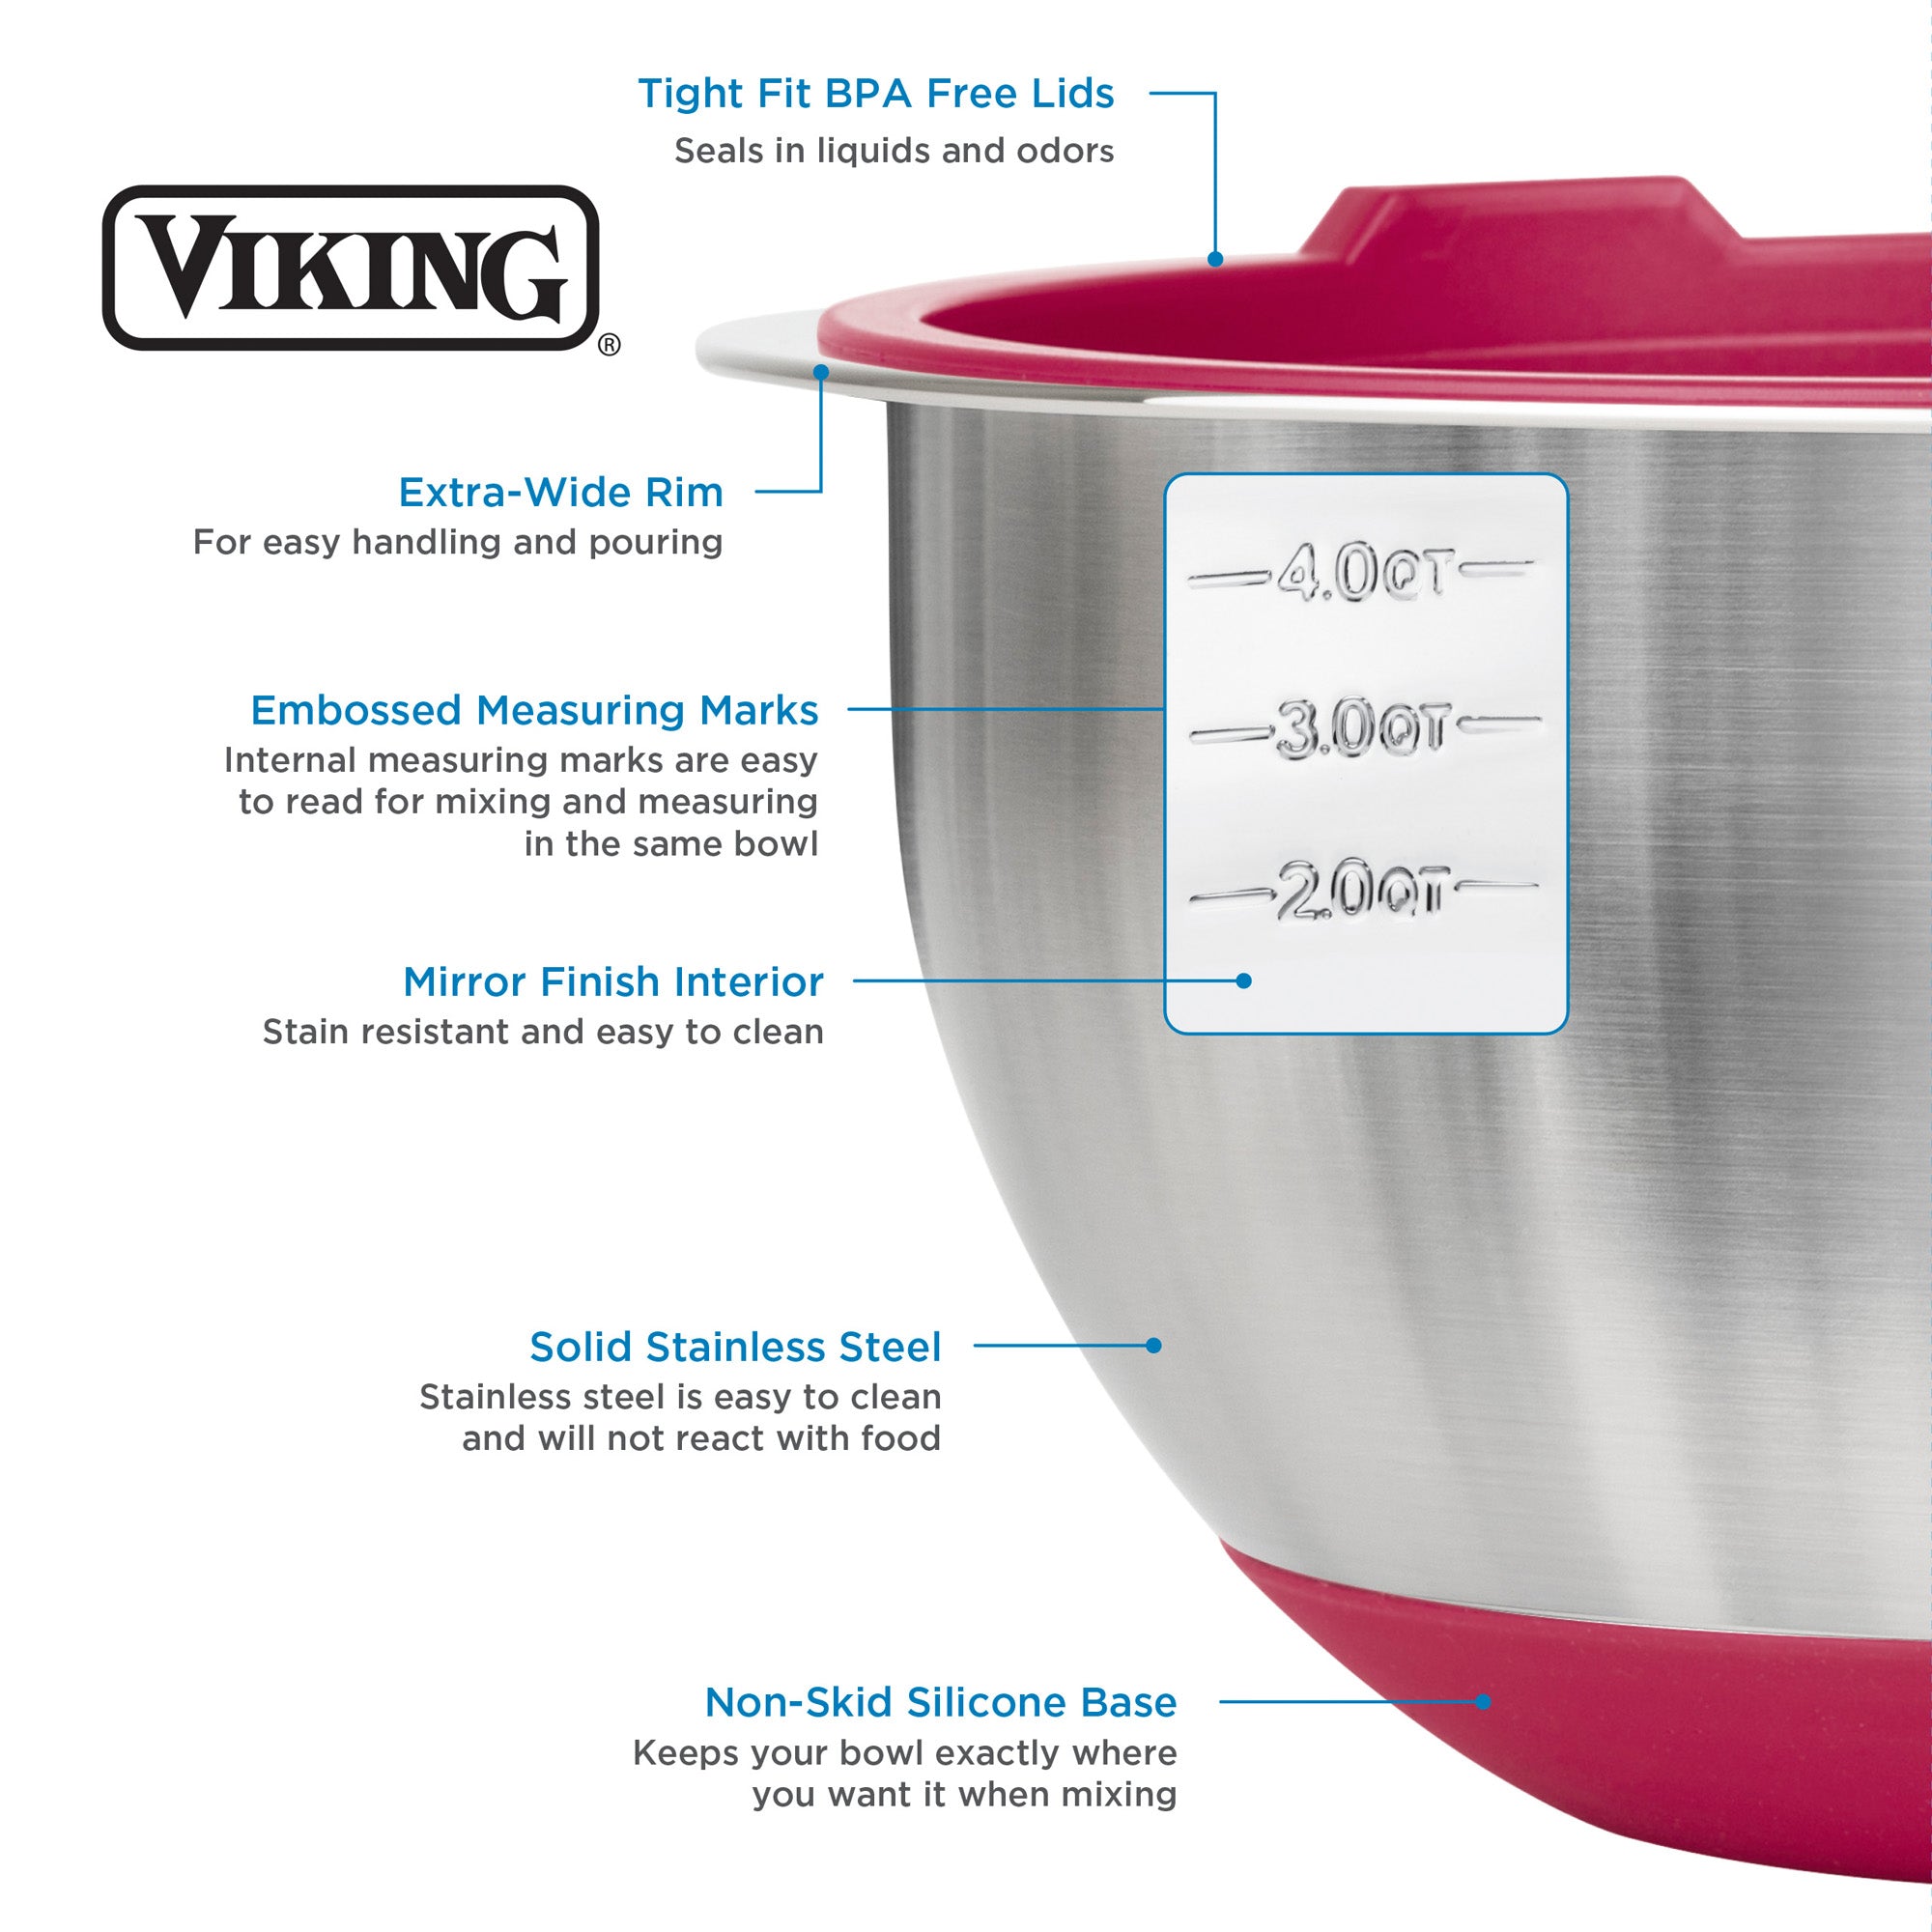 Viking 8-Piece Stainless Steel Mixing Bowl Prep Set with Strainer and Cutting Lid, Red